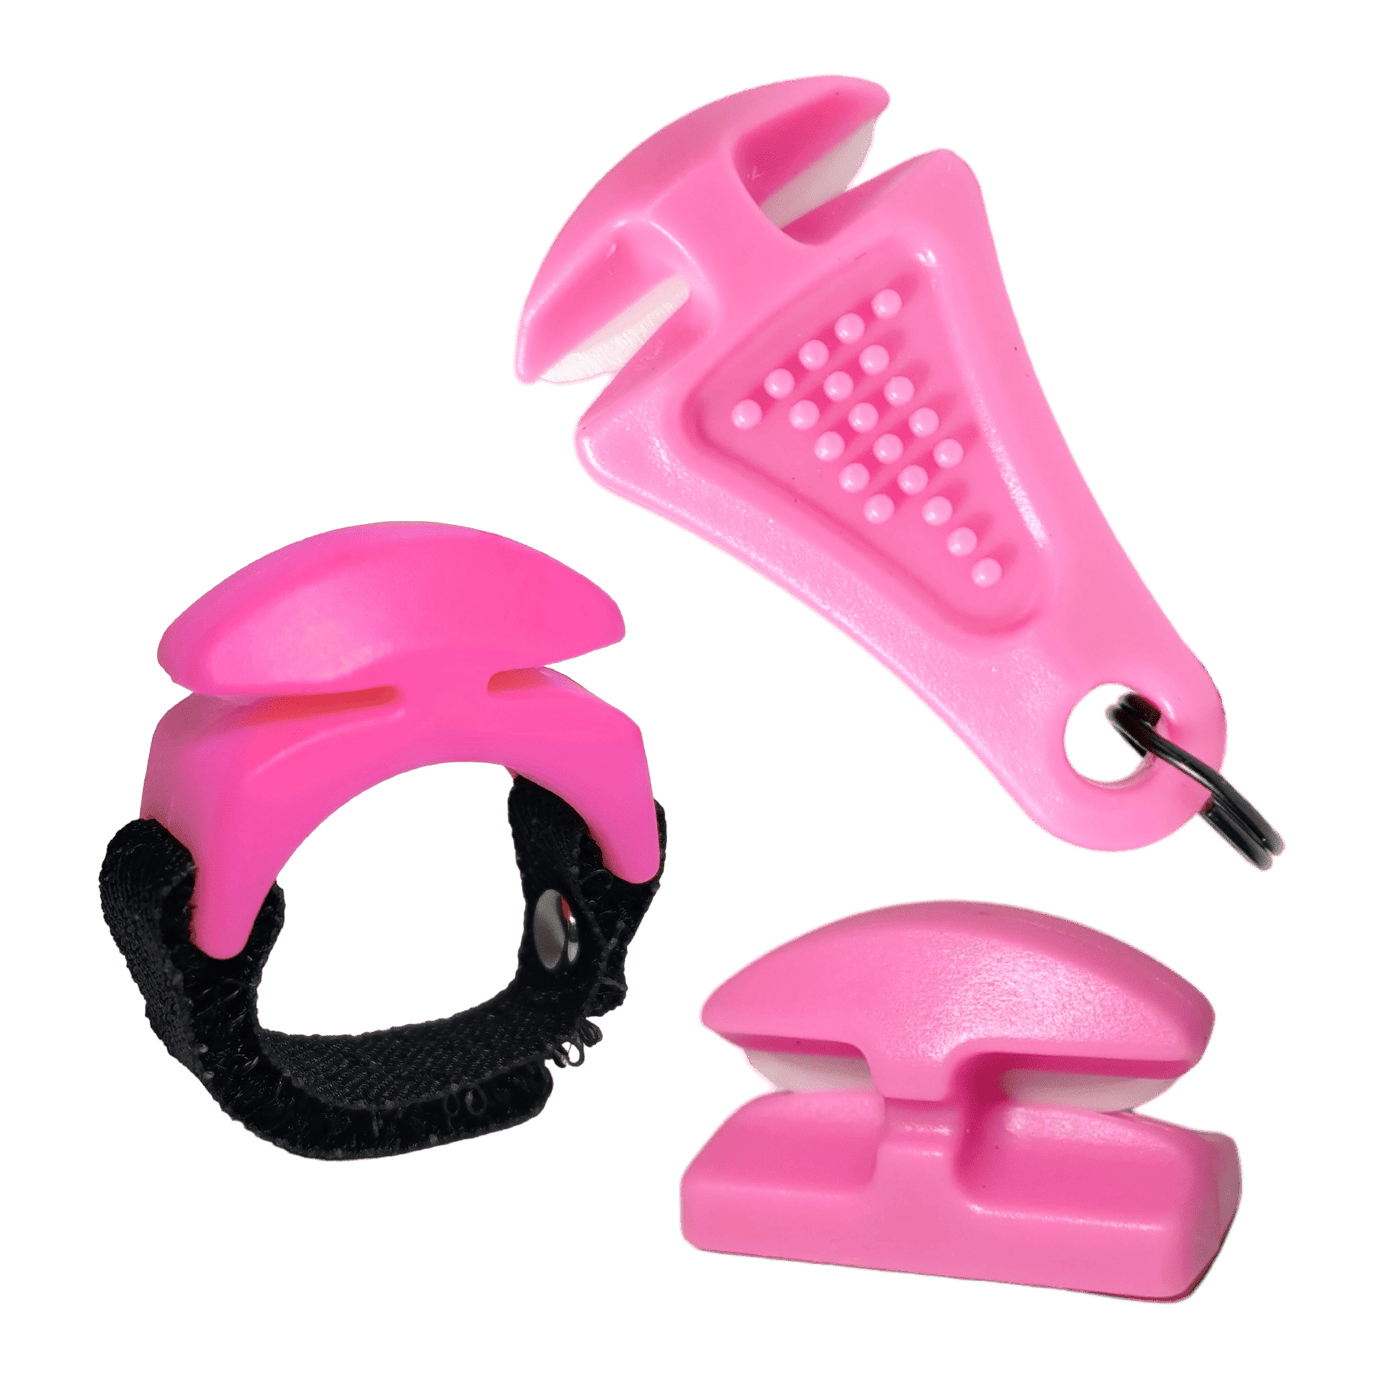 "TRIPLE PLAY" Fishing Line Cutter Multi-Pack Combo Cutter Line Cutterz Pink Large Hang-Packaging 